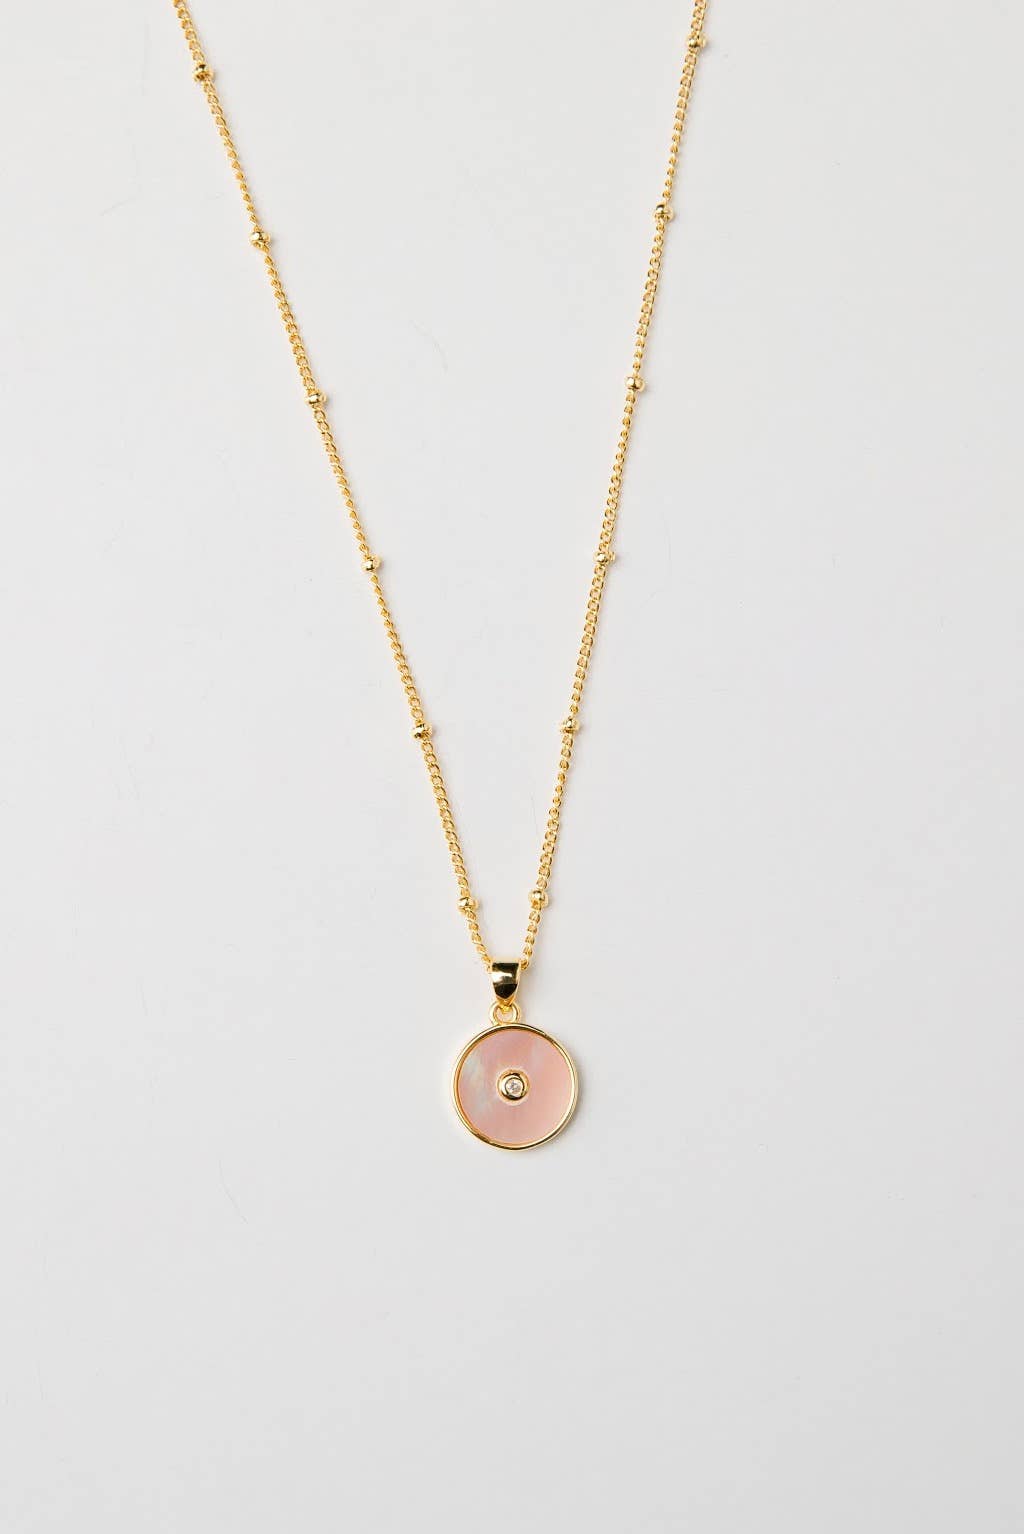 Brenda Grands Jewelry - Pink Shell Pendant Necklace